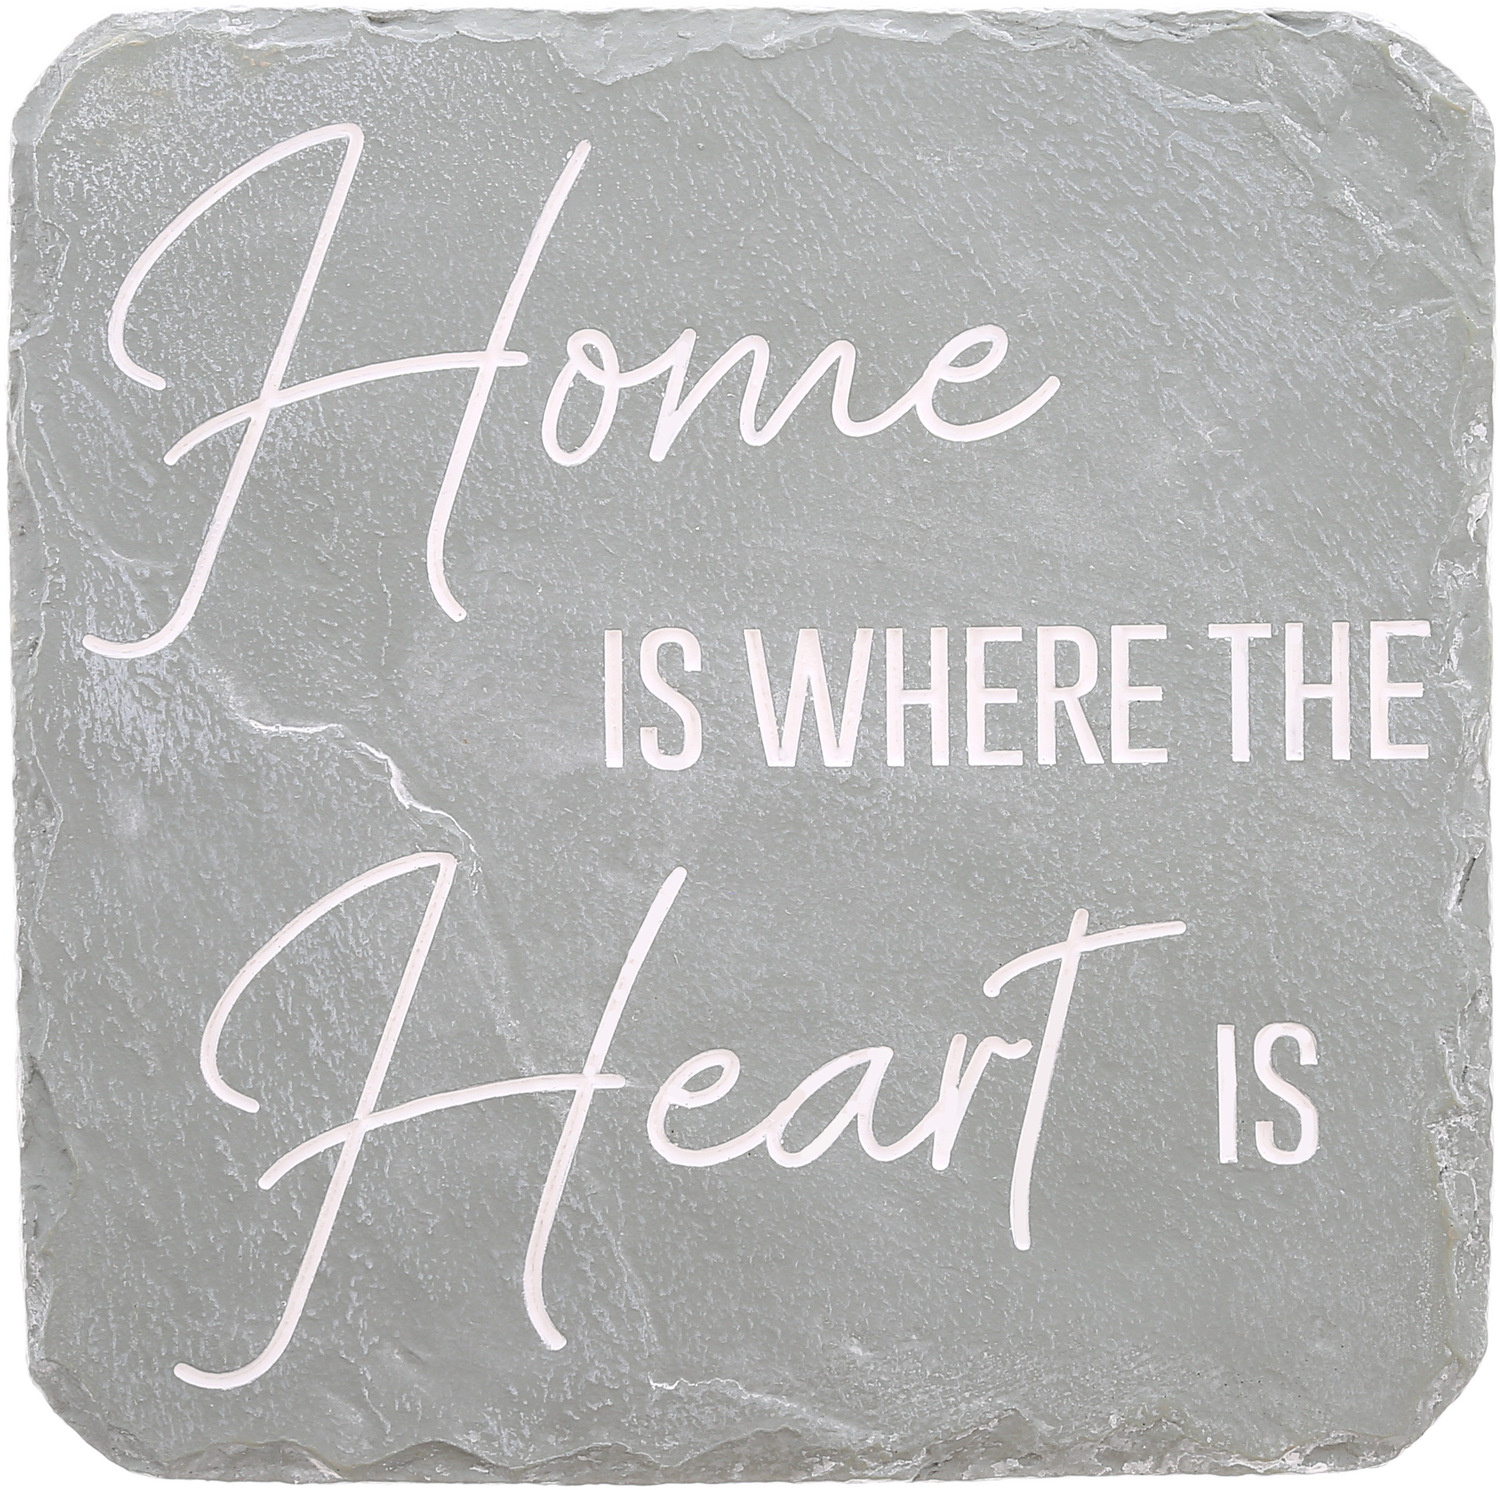 Home Is Where by Stones with Stories - Home Is Where - 7.75" x 7.75" Garden Stone